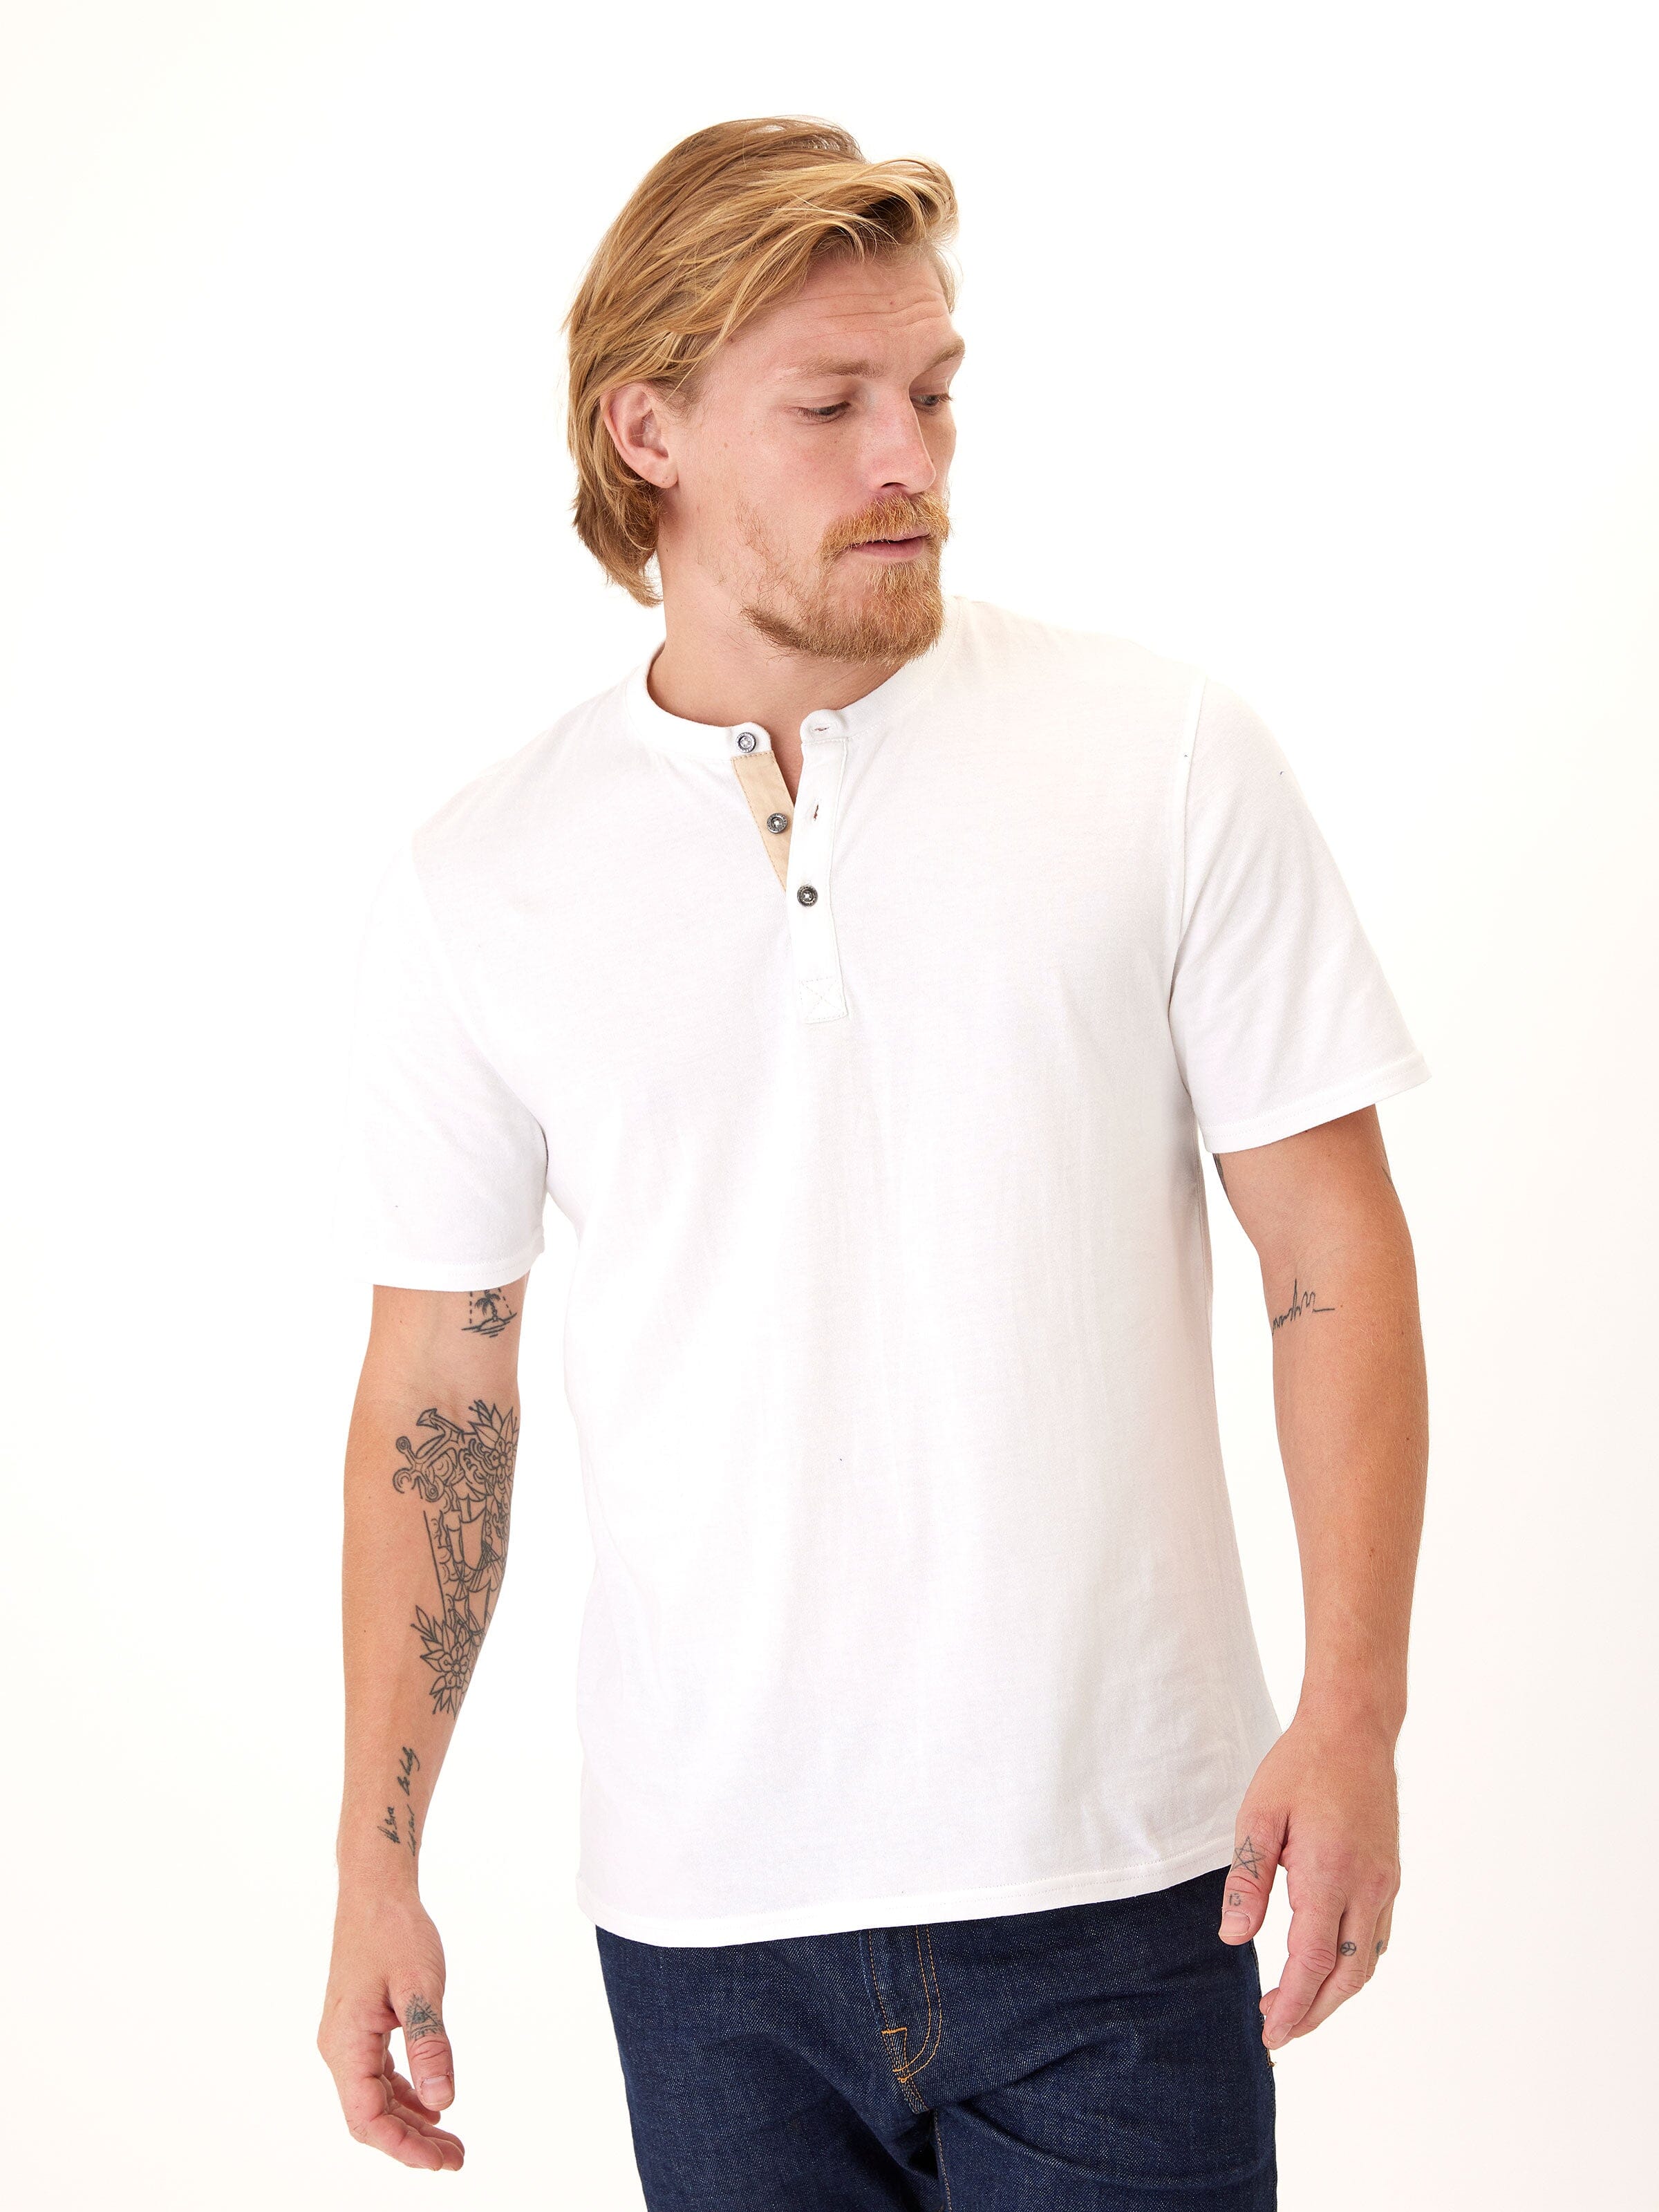 Chester Classic Jersey Contrast Henley Mens Tops Tshirt Short Threads 4 Thought 